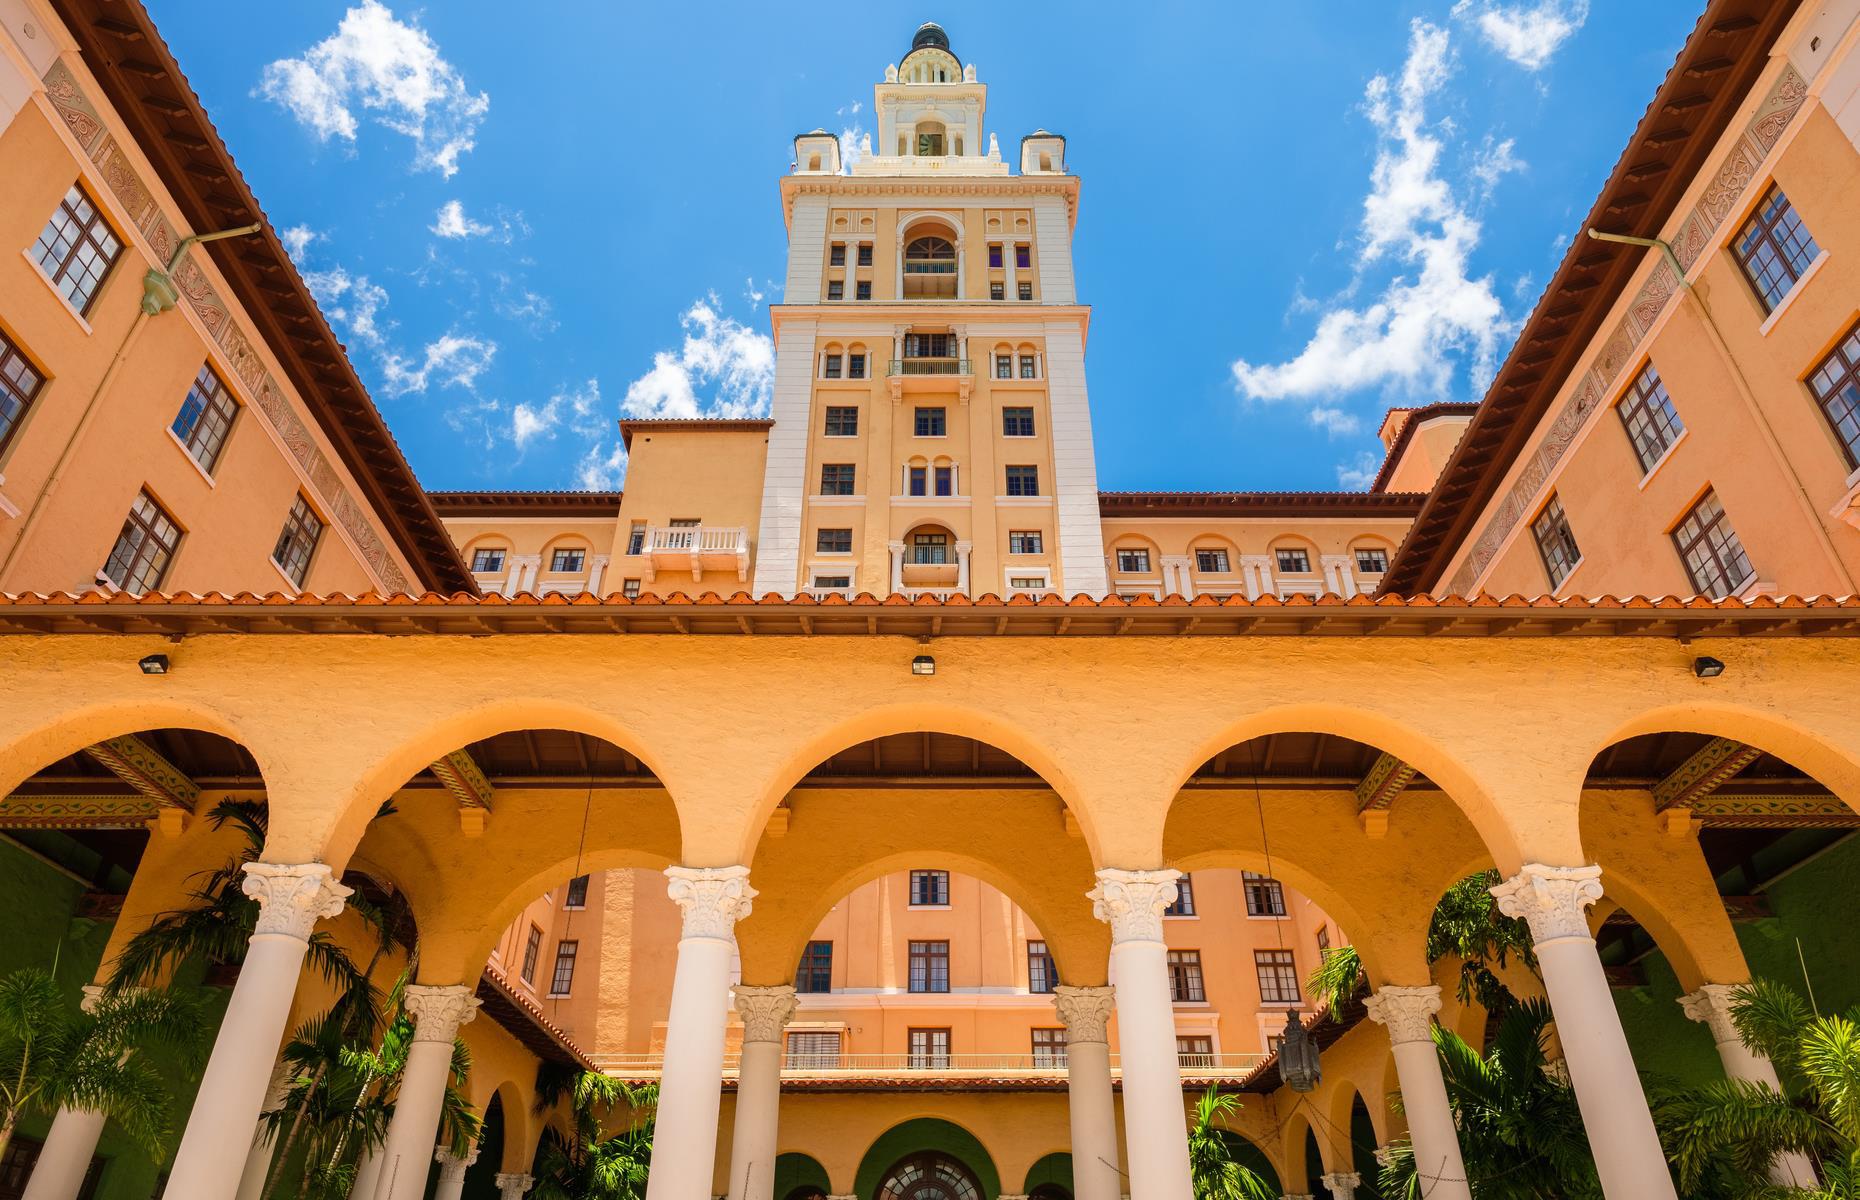 <p>Coral Gables, a suburb of Miami, has long attracted the rich and famous and <a href="https://www.booking.com/hotel/us/biltmore.en-gb.html">The Biltmore</a>, opened in 1926, is no exception, having hosted Judy Garland and the Roosevelts. The five-star hotel had to close its doors during the Second World War so it could be used as a military hospital until 1968. When it reopened as a hotel once more in the late 1980s, guests started to speak of ghosts of the soldiers who died within its walls. These sightings are also accompanied by other apparitions, including that of Fatty Walsh – a New York mobster who was shot here in 1929.</p>